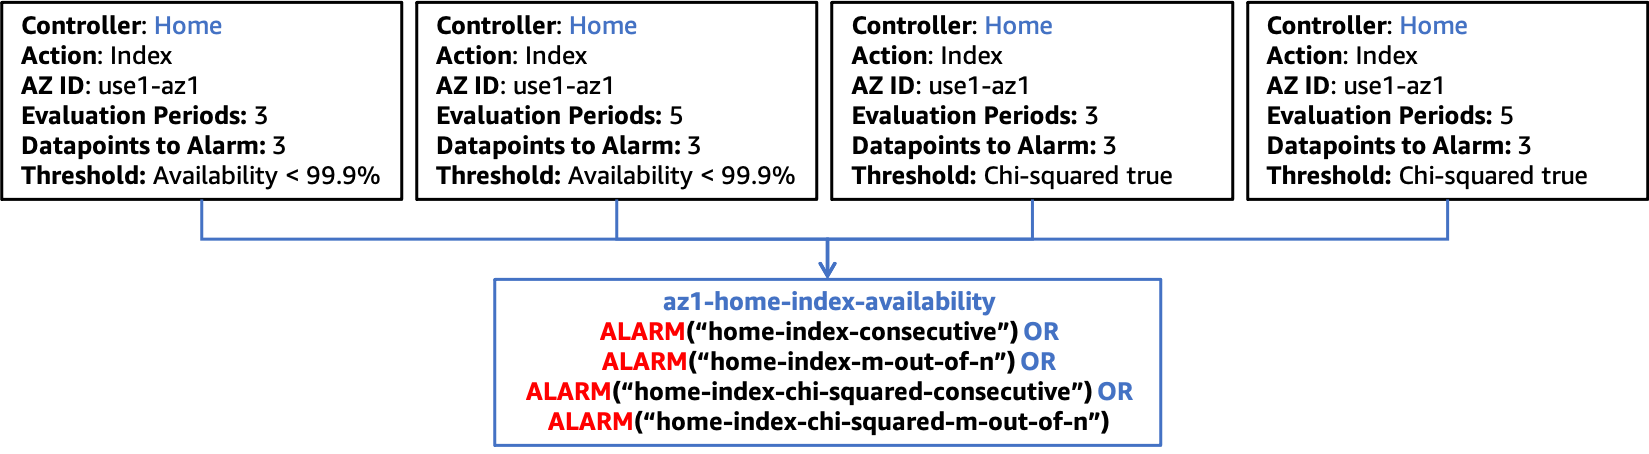 Diagram showing integrating the chi-squared statistics test with composite alarms